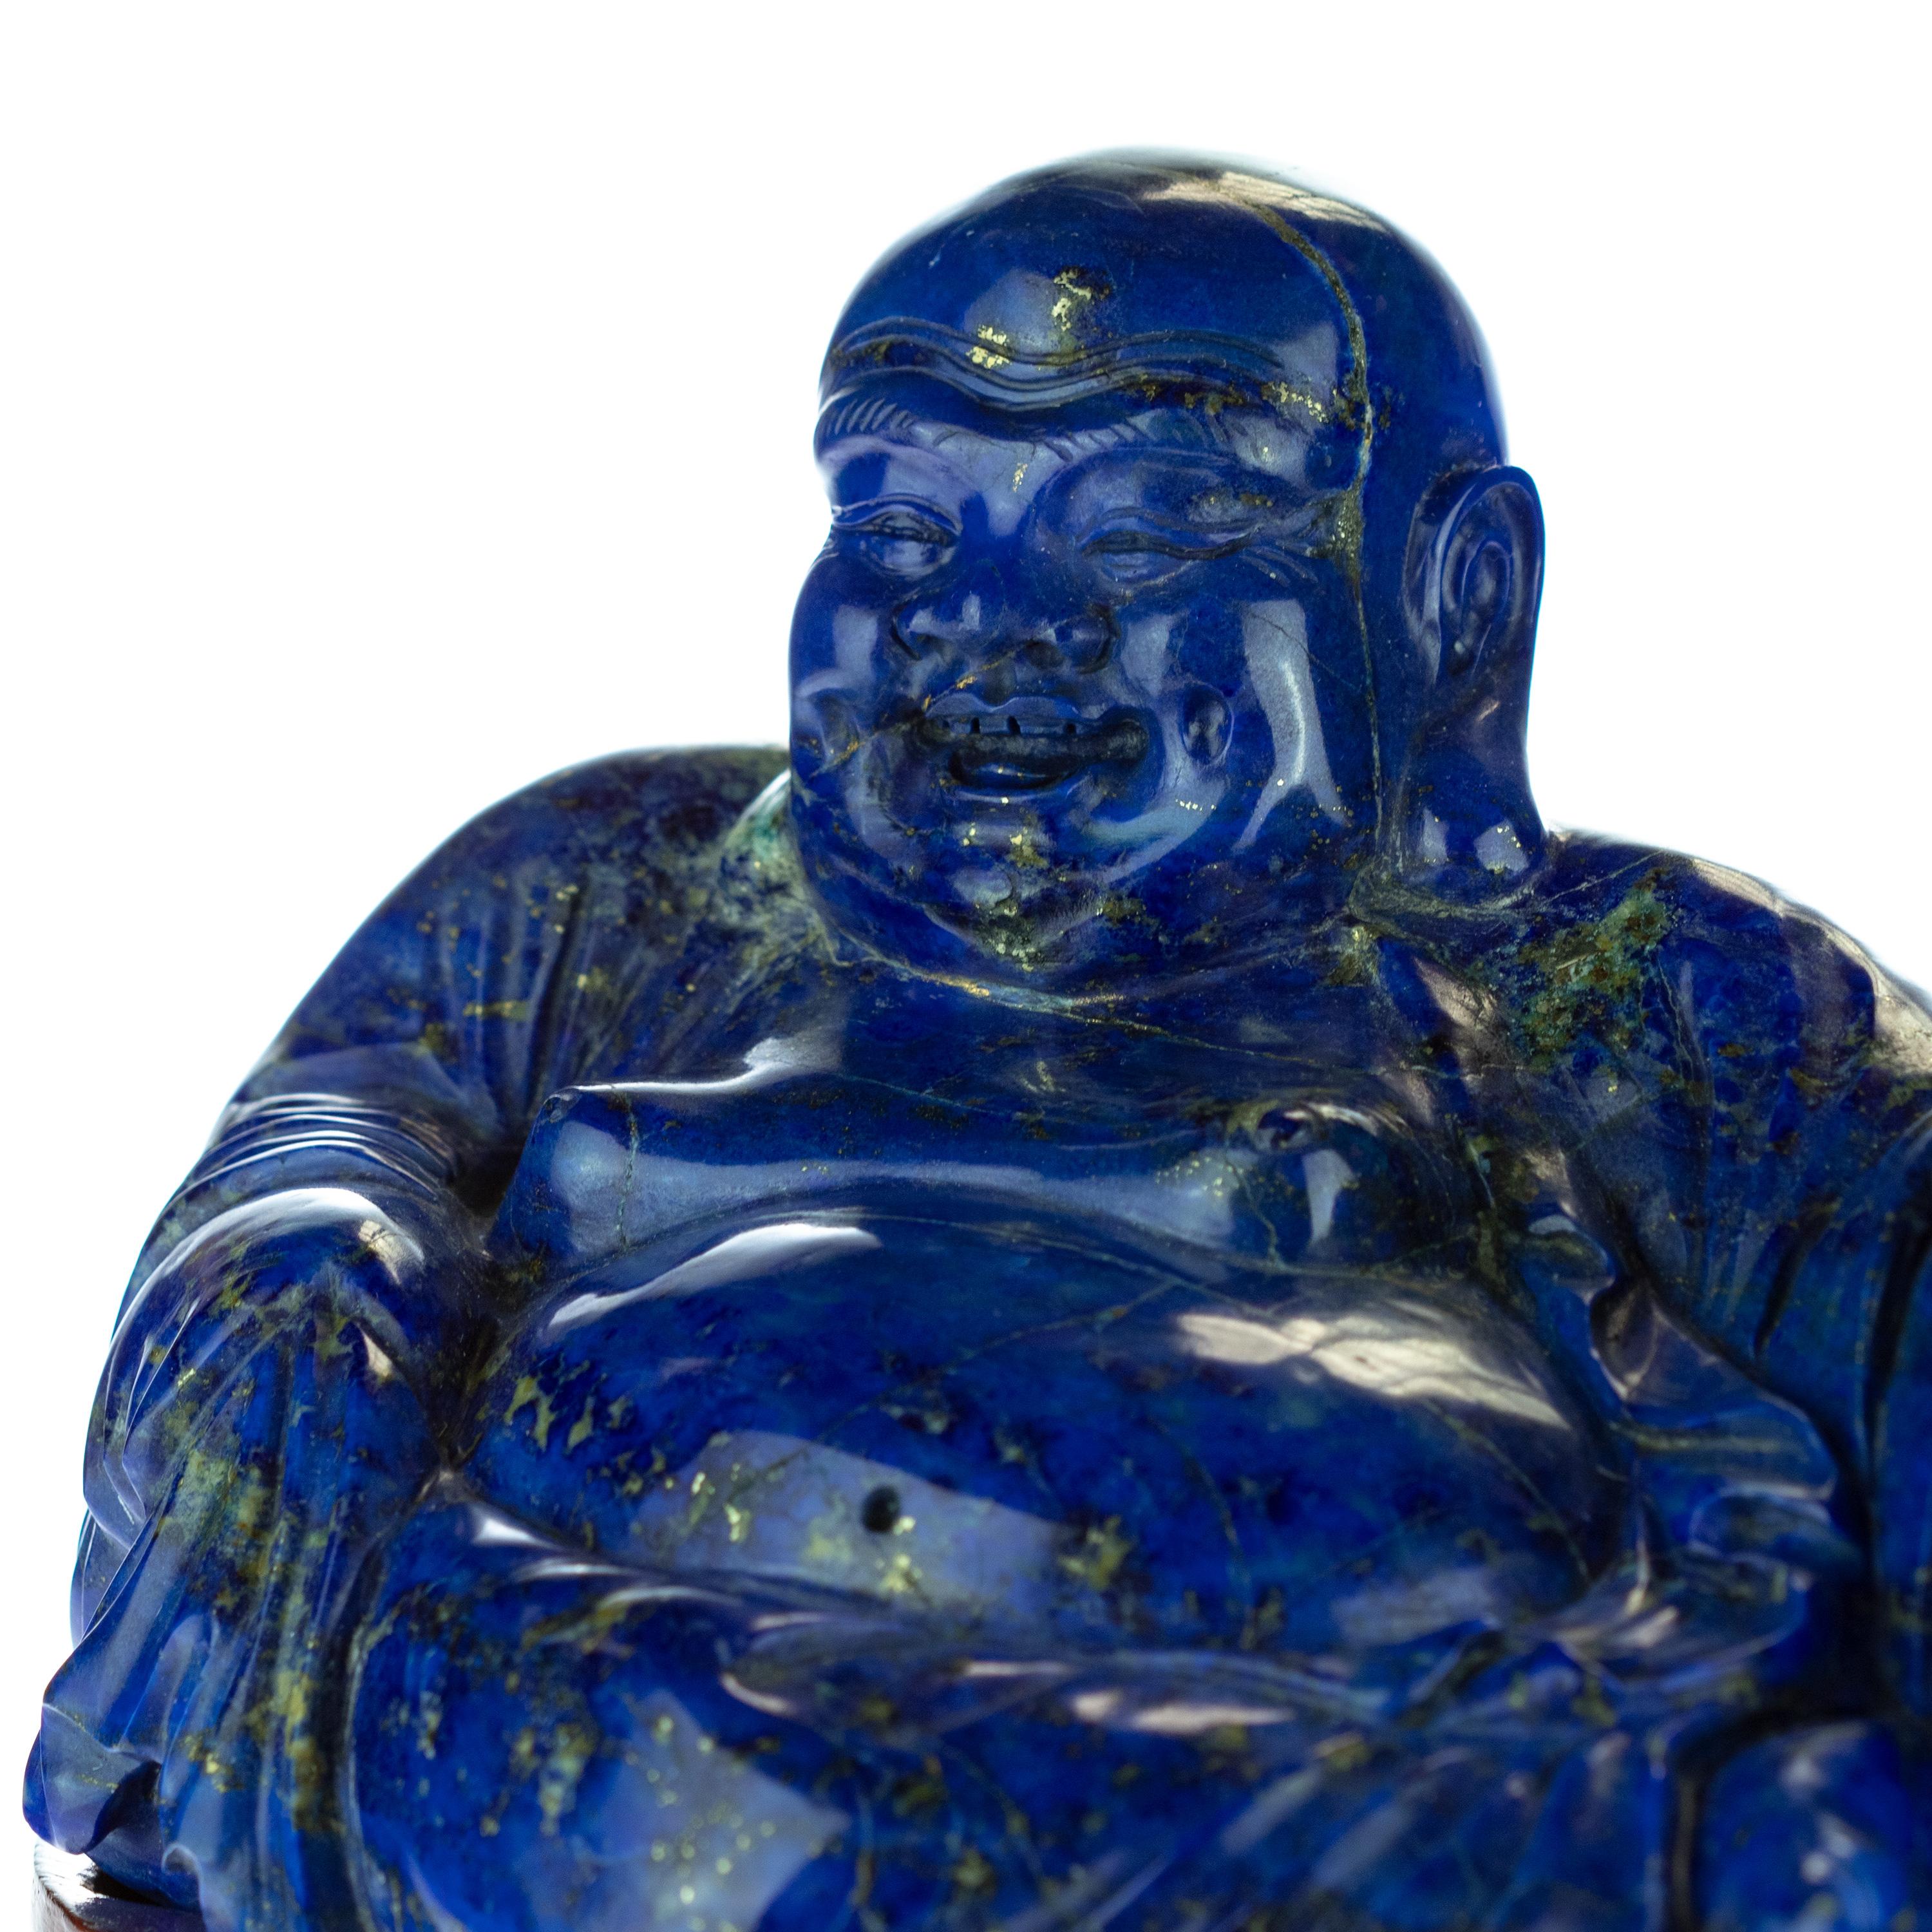 Hand-Carved Lapis Lazuli Natural Laughing Buddha Carved Gemstone Asian Art Statue Sculpture For Sale